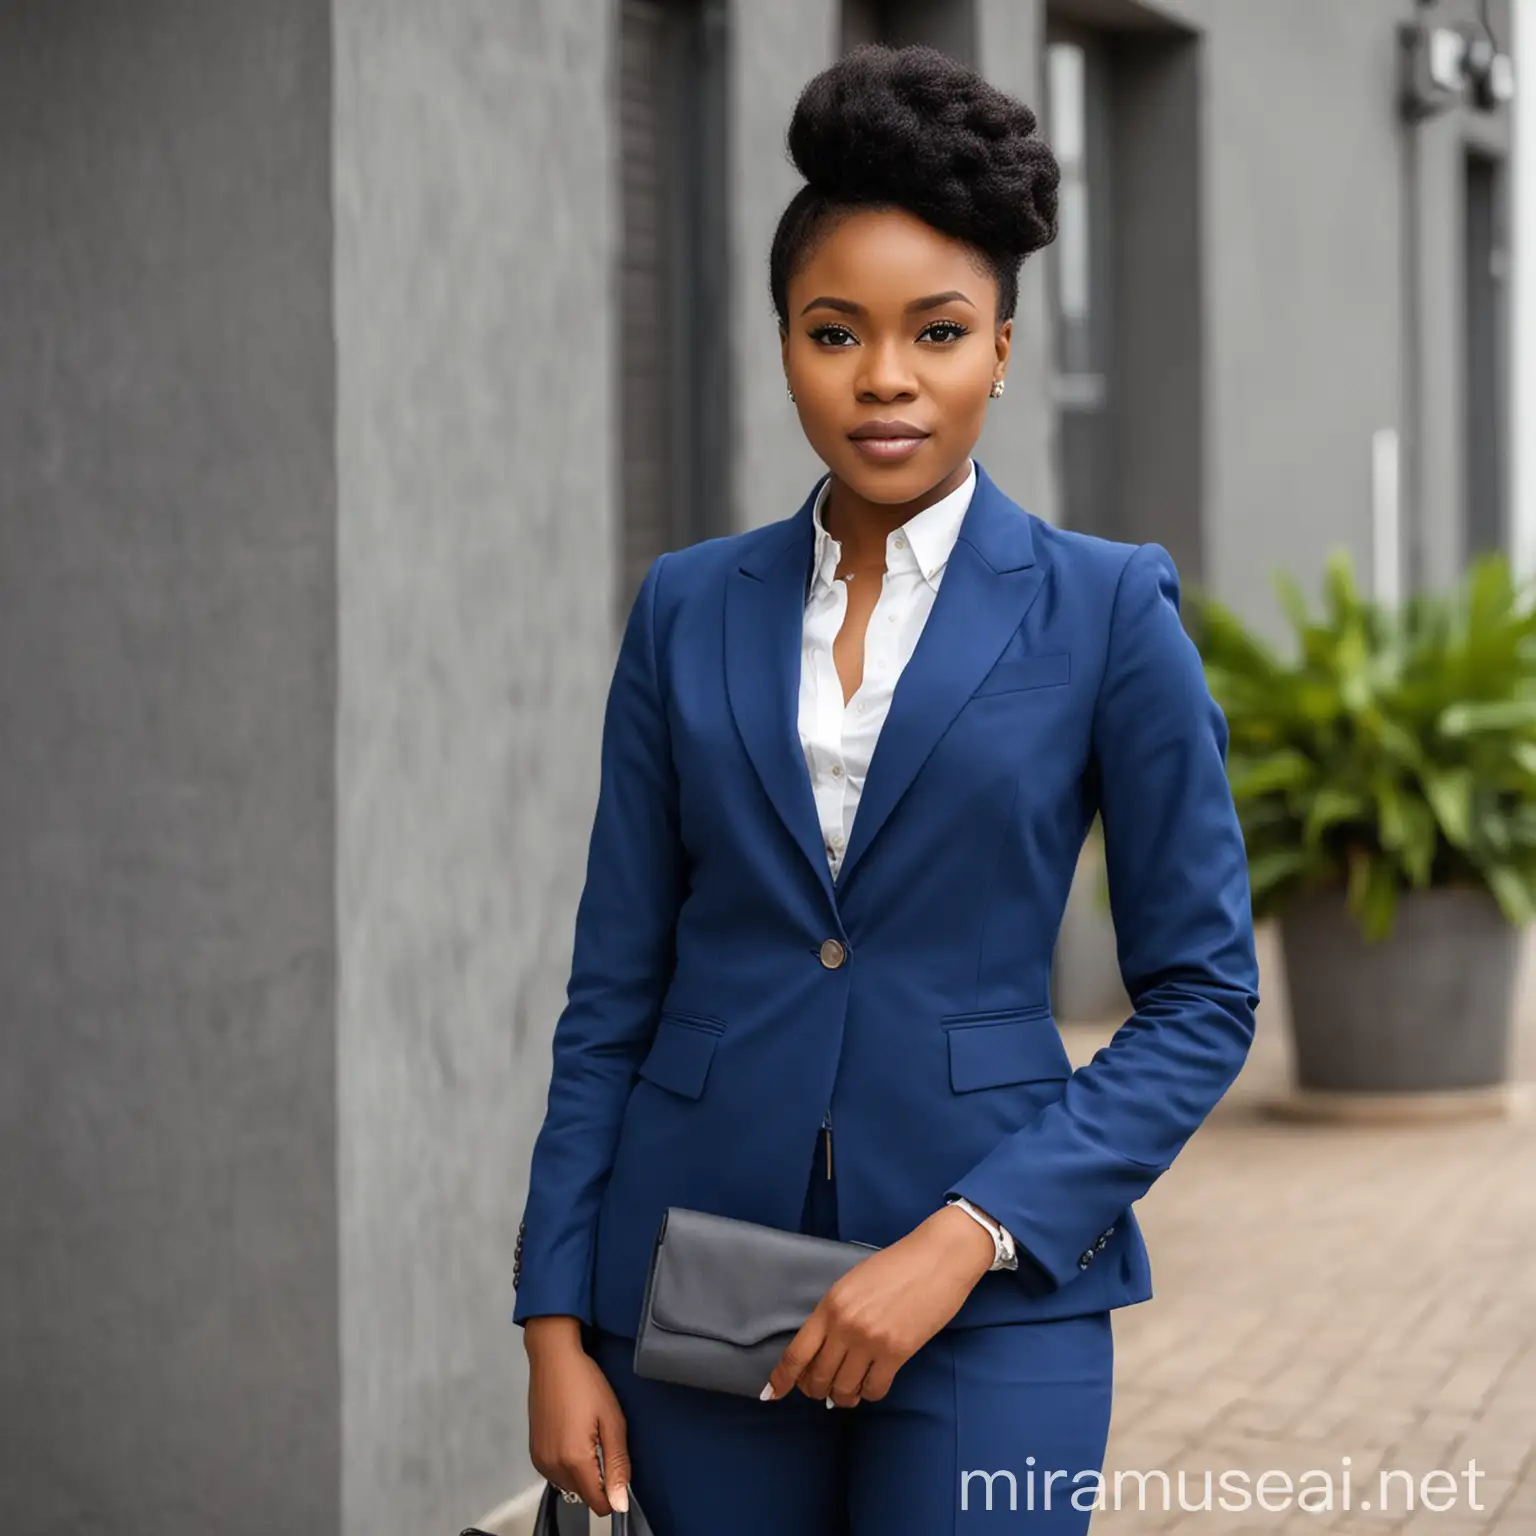 Professional Nigerian Woman in Blue Suit with Natural Color